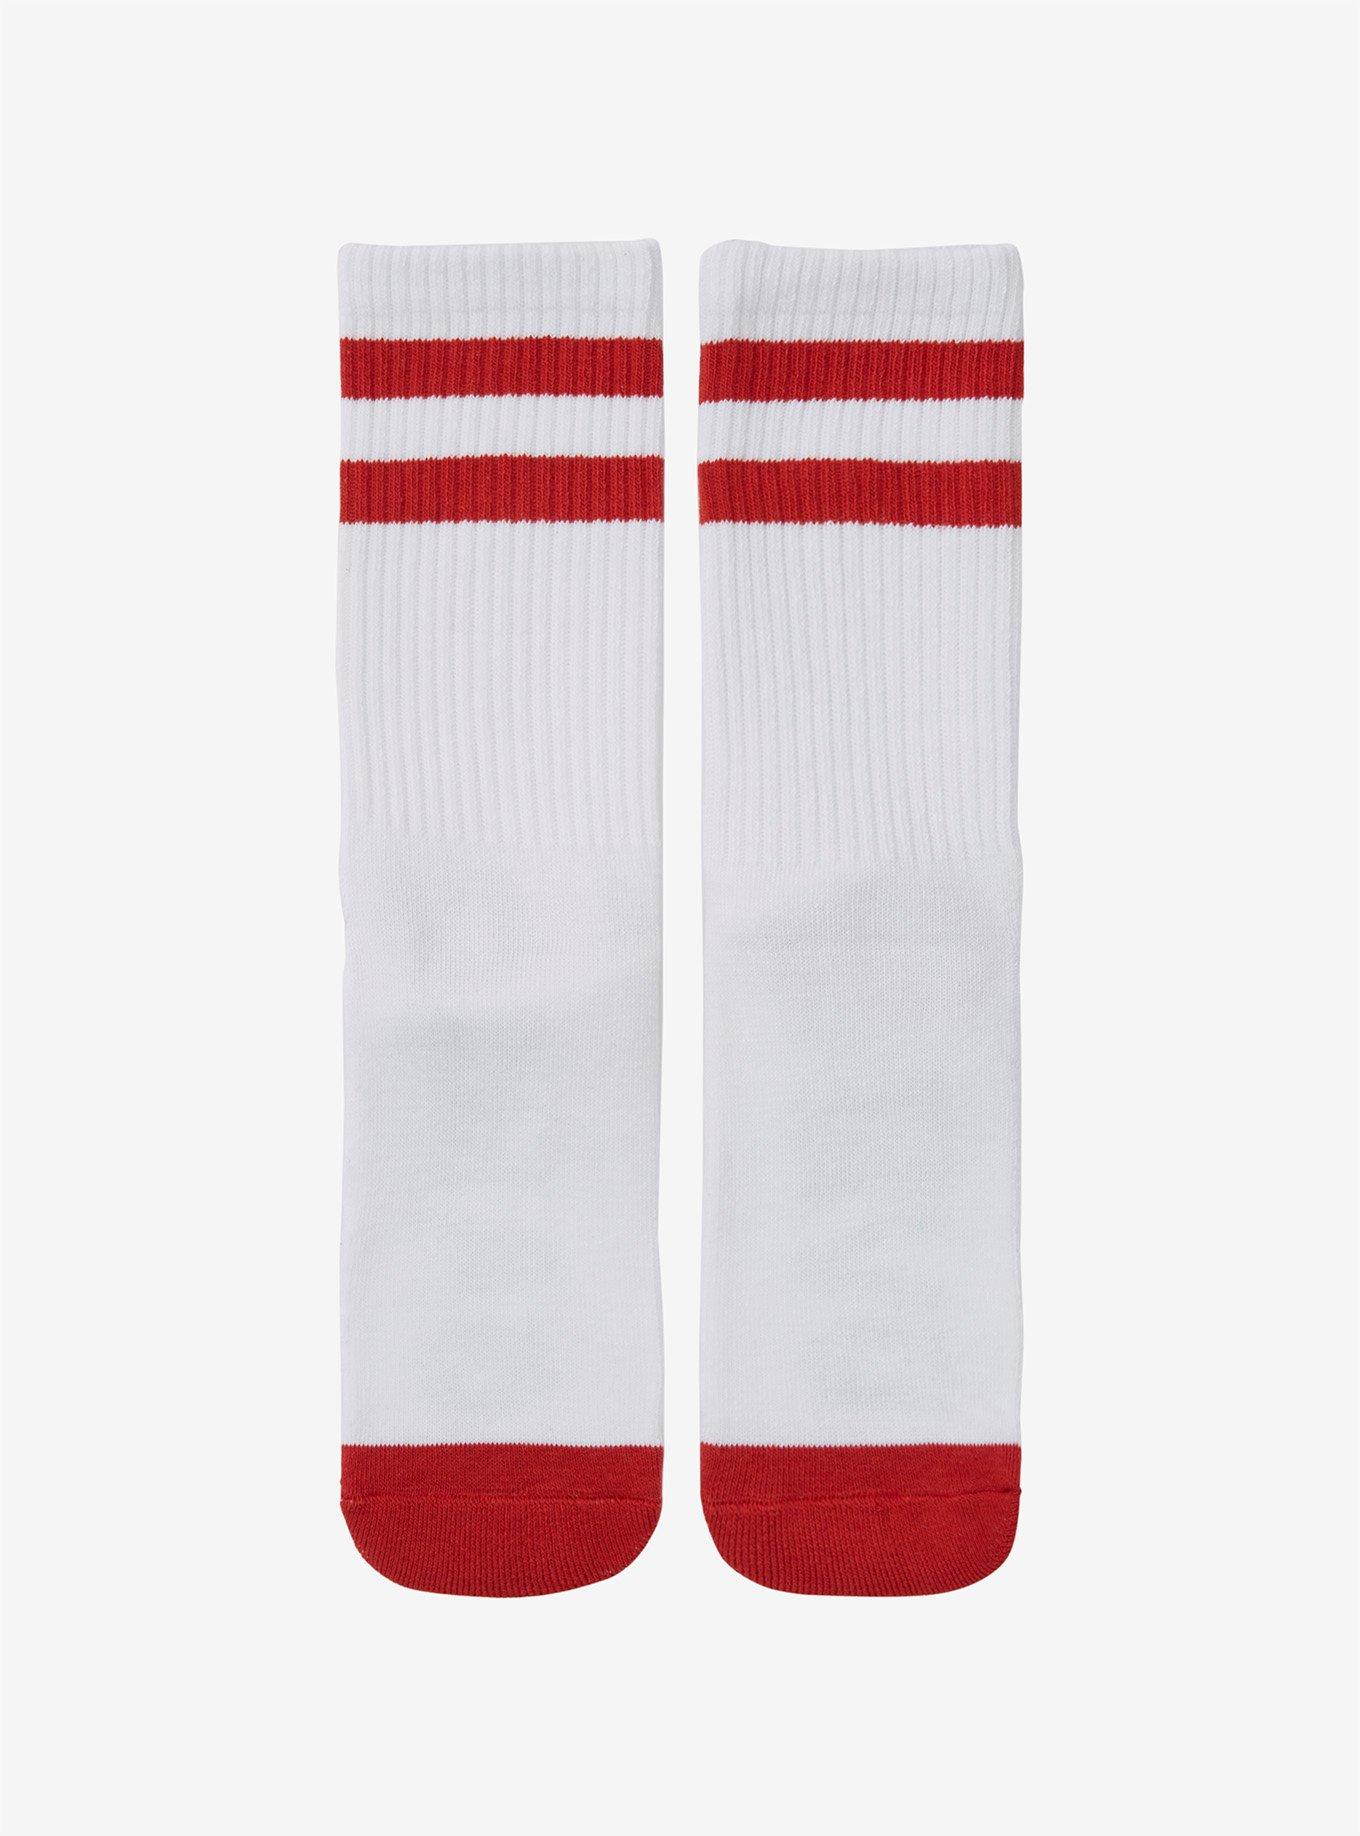 Game Over Crew Socks | Hot Topic